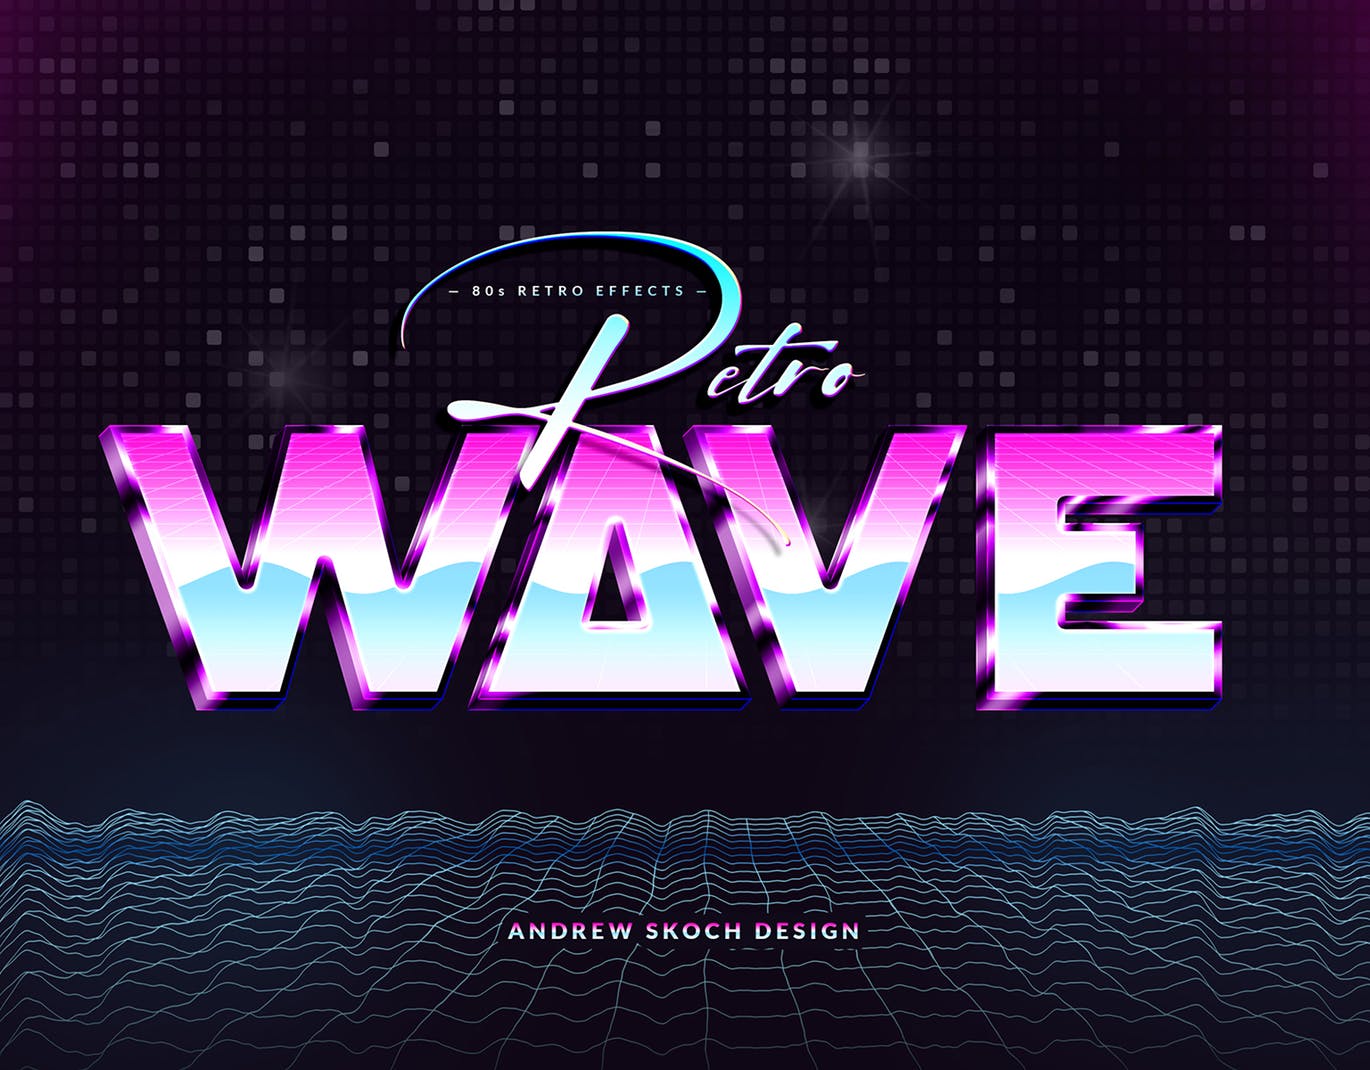 New 80s Text Effects